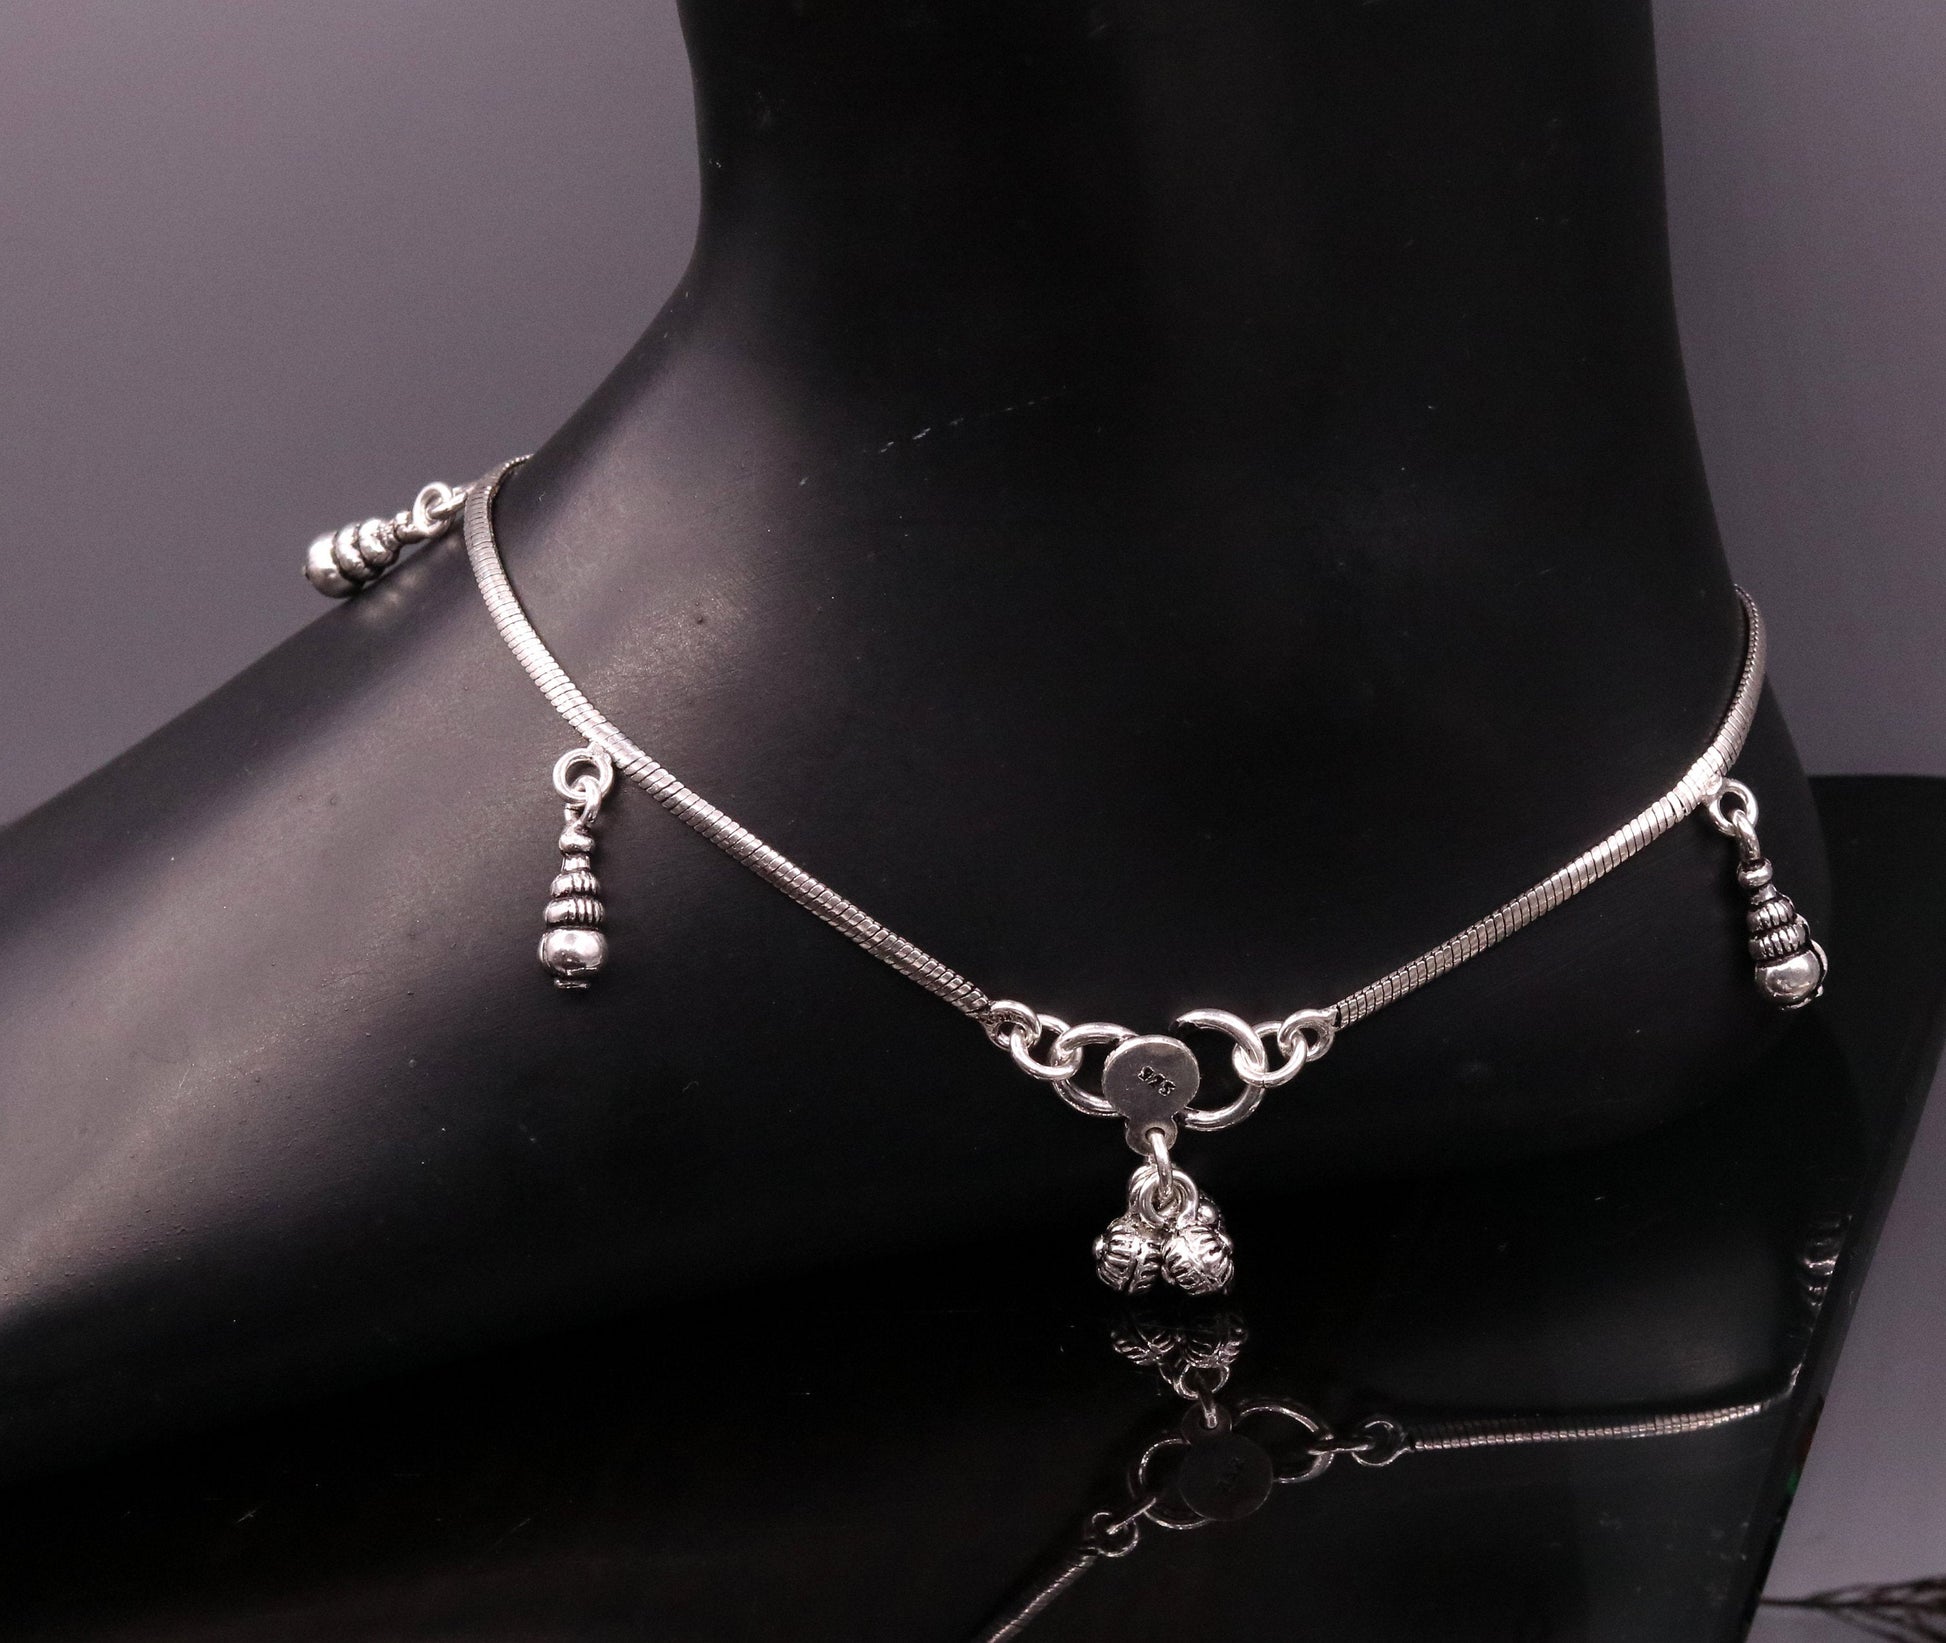 925 sterling silver handmade snake chain anklets, ankle bracelet, foot jewelry, charm ankle bracelet, dainty gifting belly dance ank76 - TRIBAL ORNAMENTS